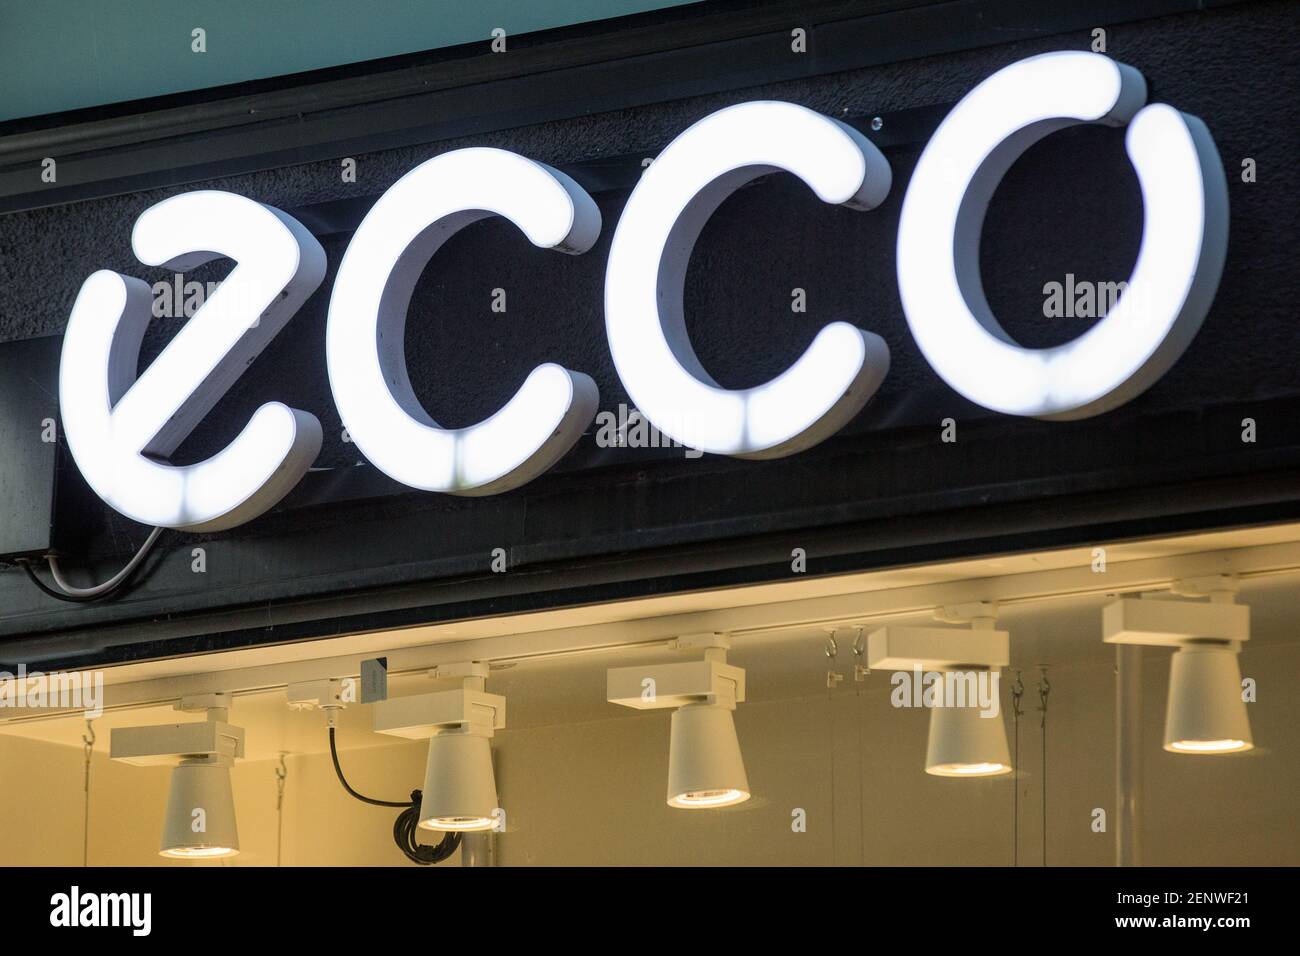 Danish shoe manufacturer and retailer founded in 1963 by Karl Toosbuy, Ecco  logo seen in Gothenburg. (Photo by Karol Serewis / SOPA Images/Sipa USA  Stock Photo - Alamy